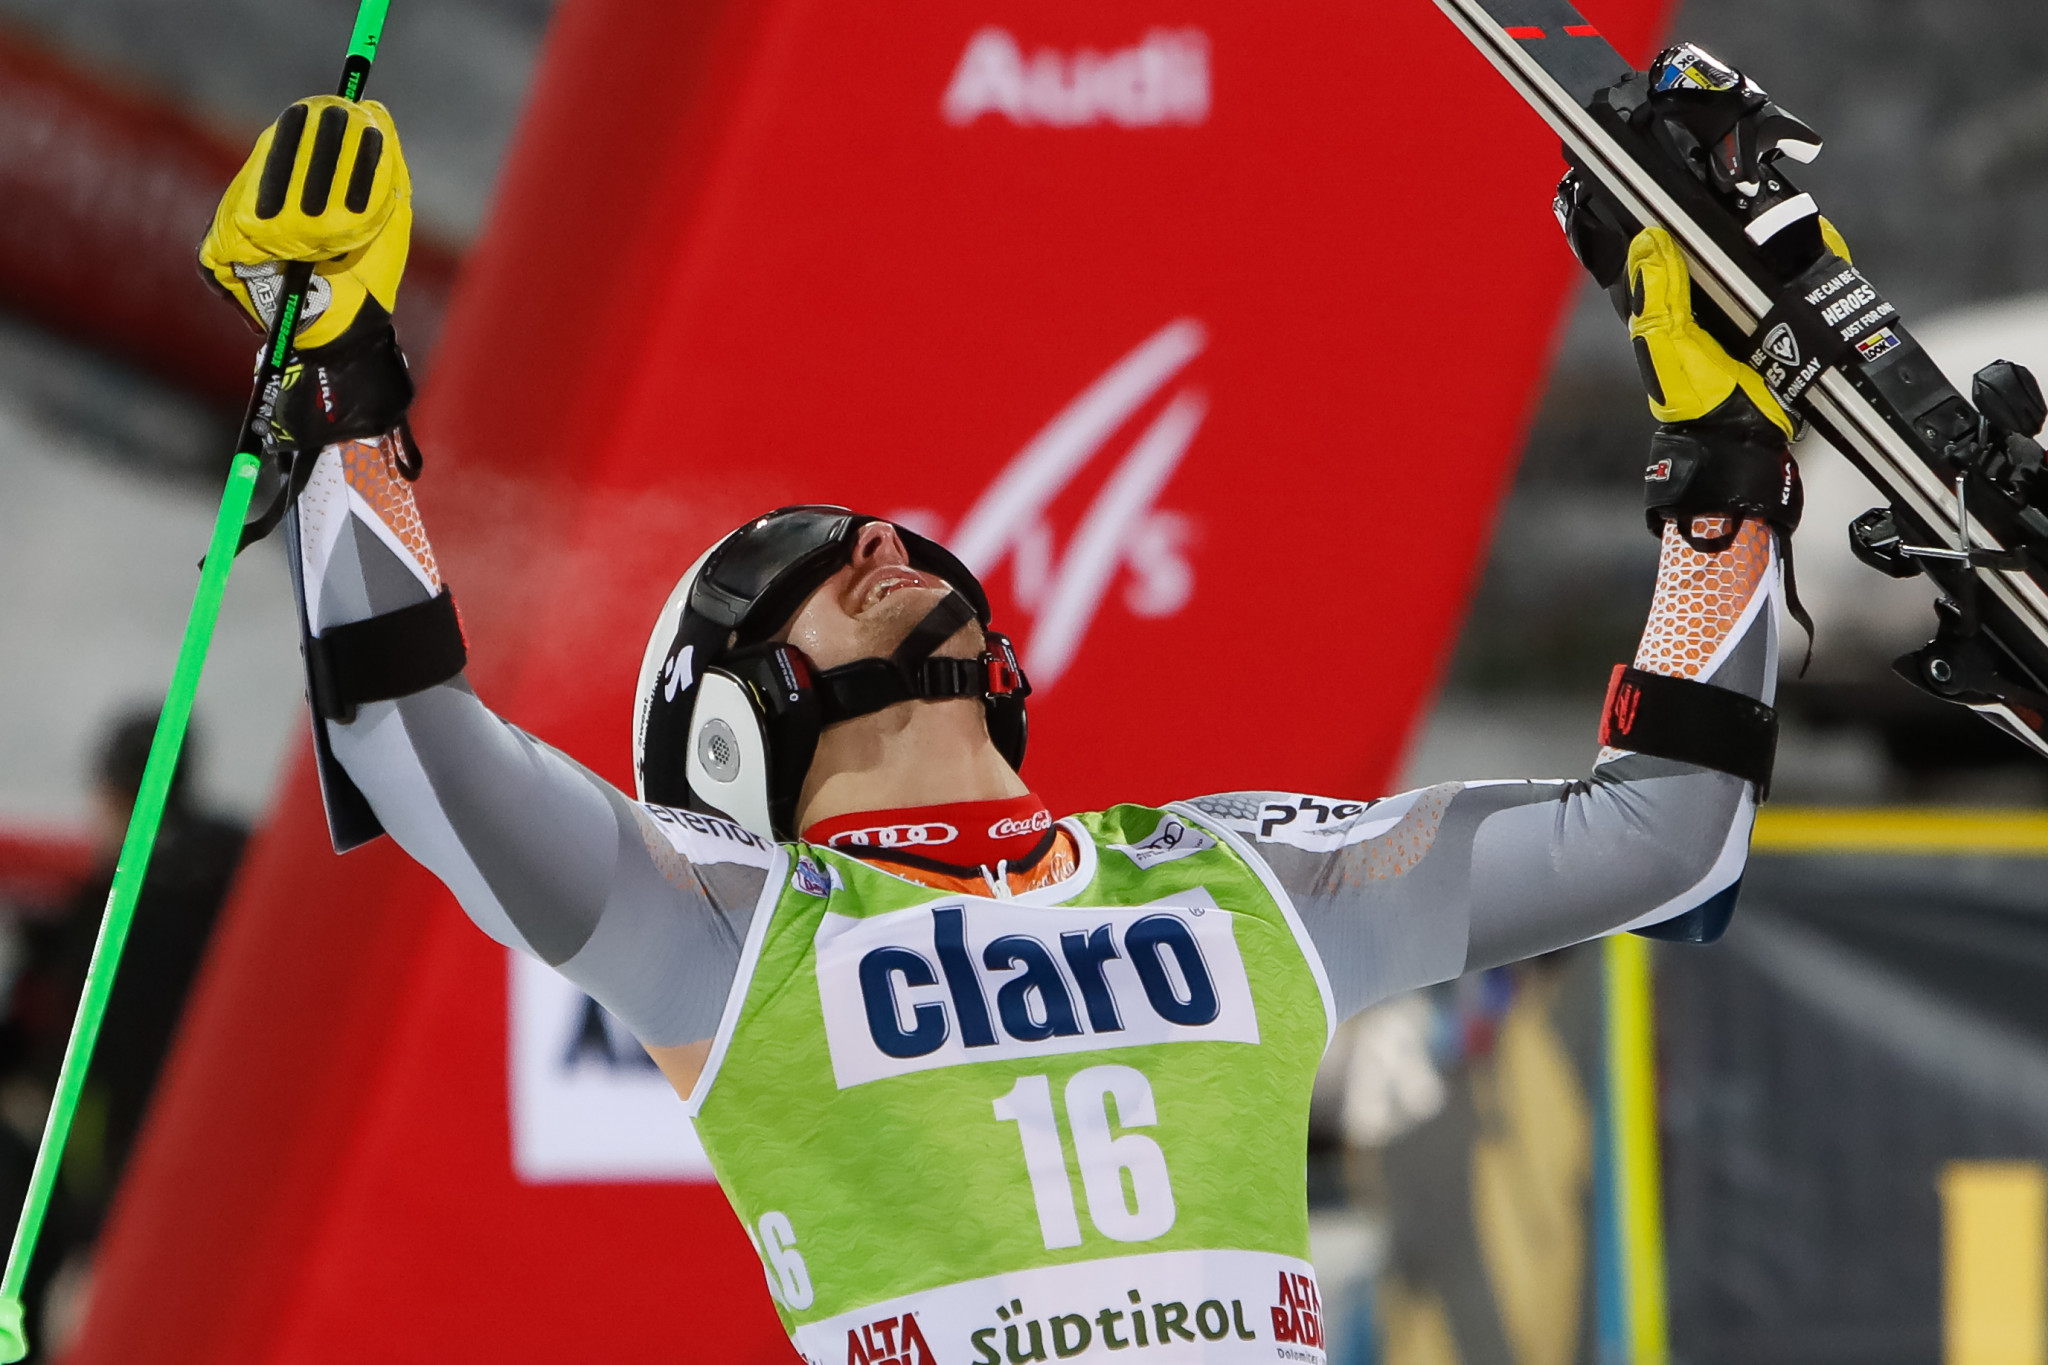 Norway's Windingstad claims first-ever FIS Alpine Skiing World Cup win